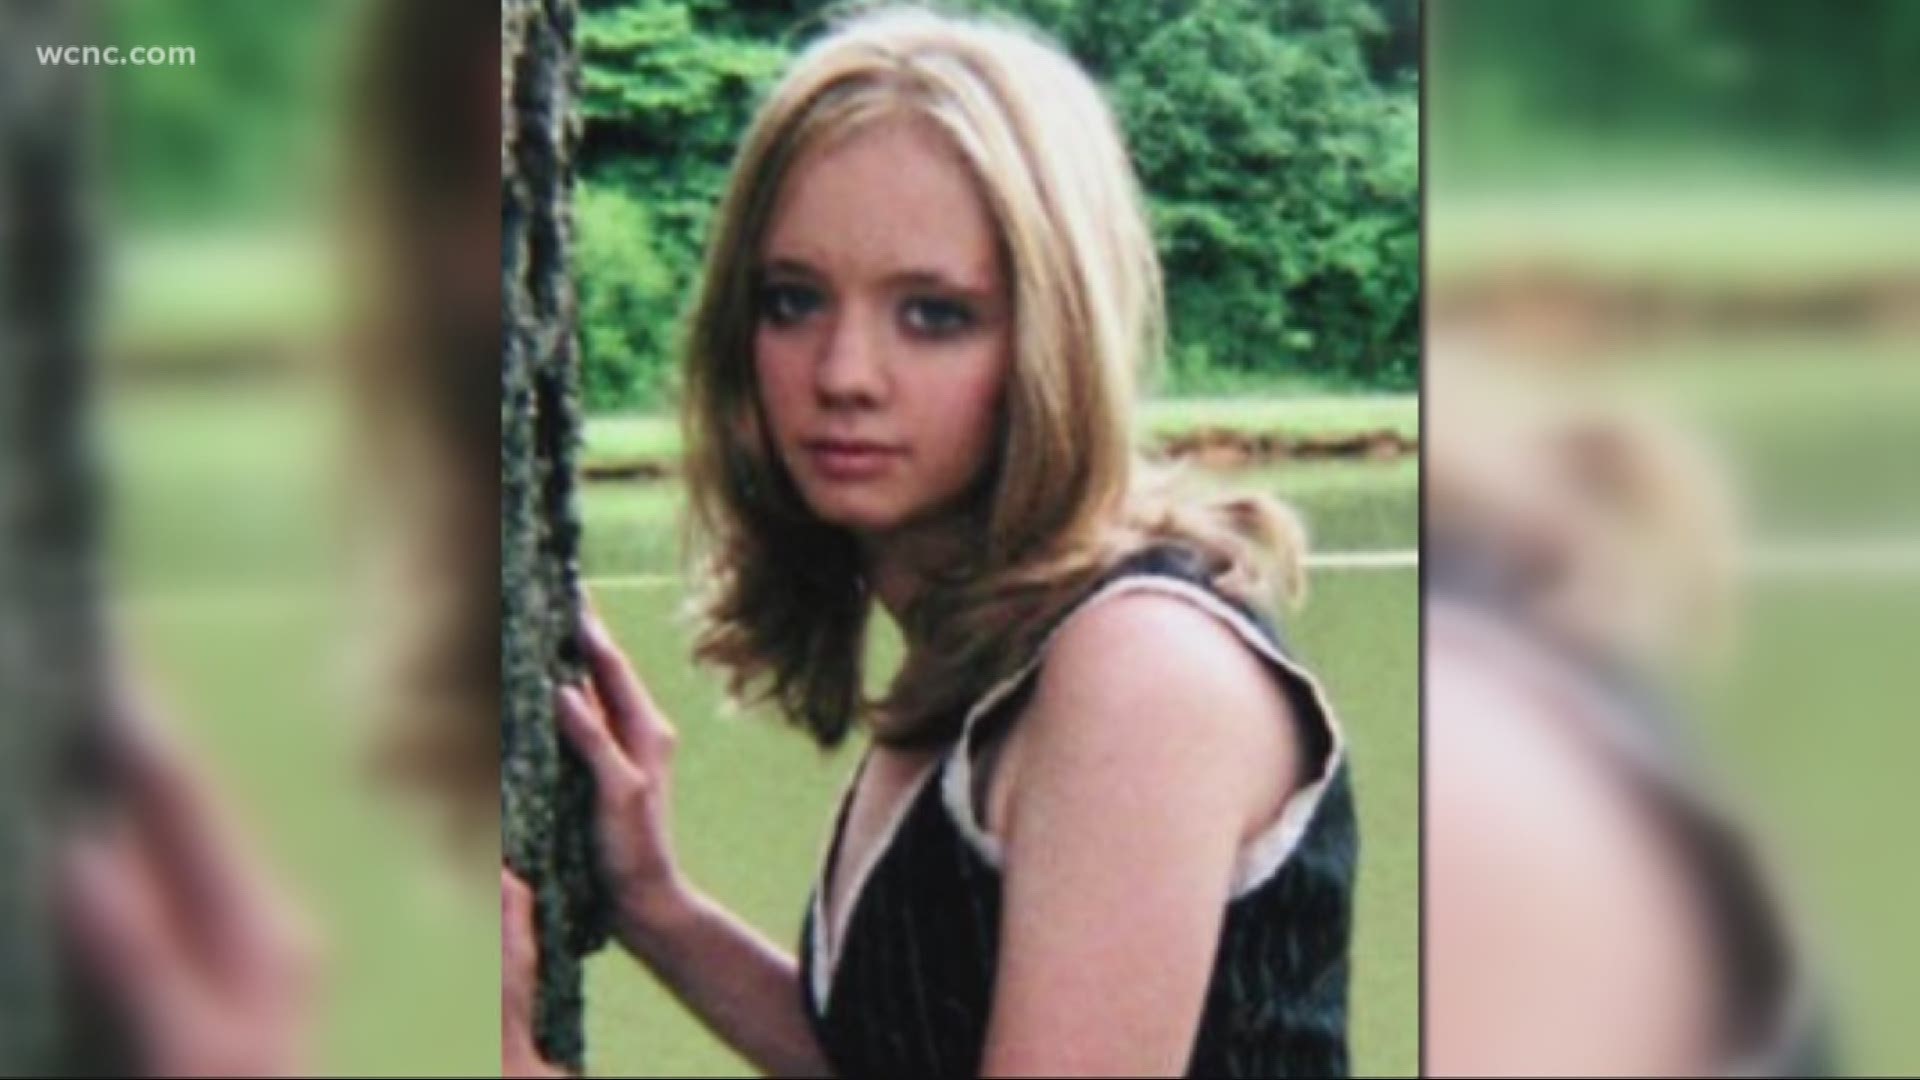 Jamie Fraley went missing from her Gastonia apartment back in 2008. She was just 22-years old. Her mother said she last heard from Jamie on the phone, and her daughter said she wasn't feeling well.